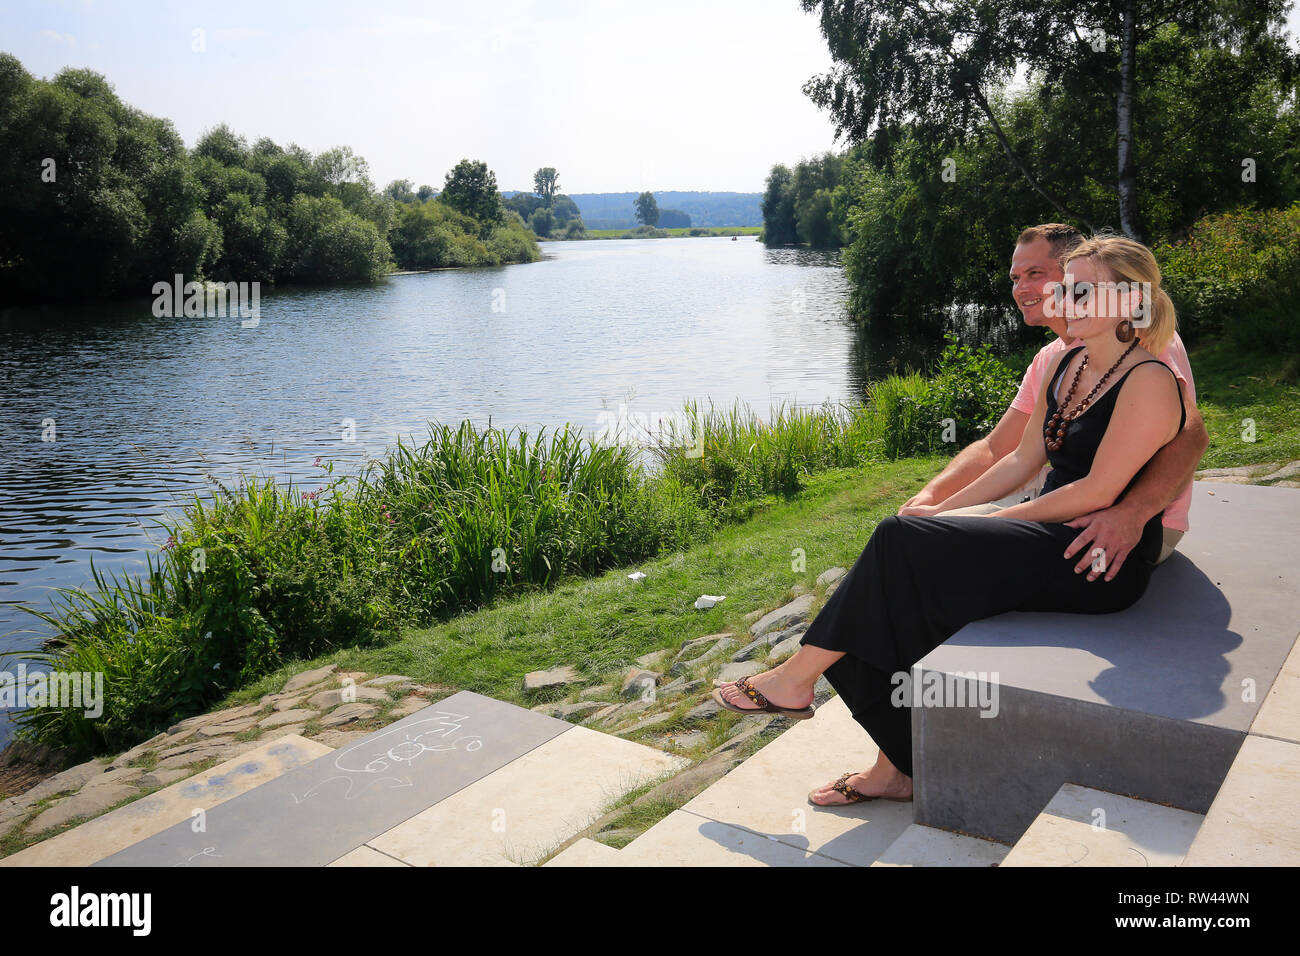 Essen, North Rhine-Westphalia, Ruhr area, Germany, Ruhr in the district of Steele, a young couple sits on the banks of the Ruhr, photographed on the o Stock Photo